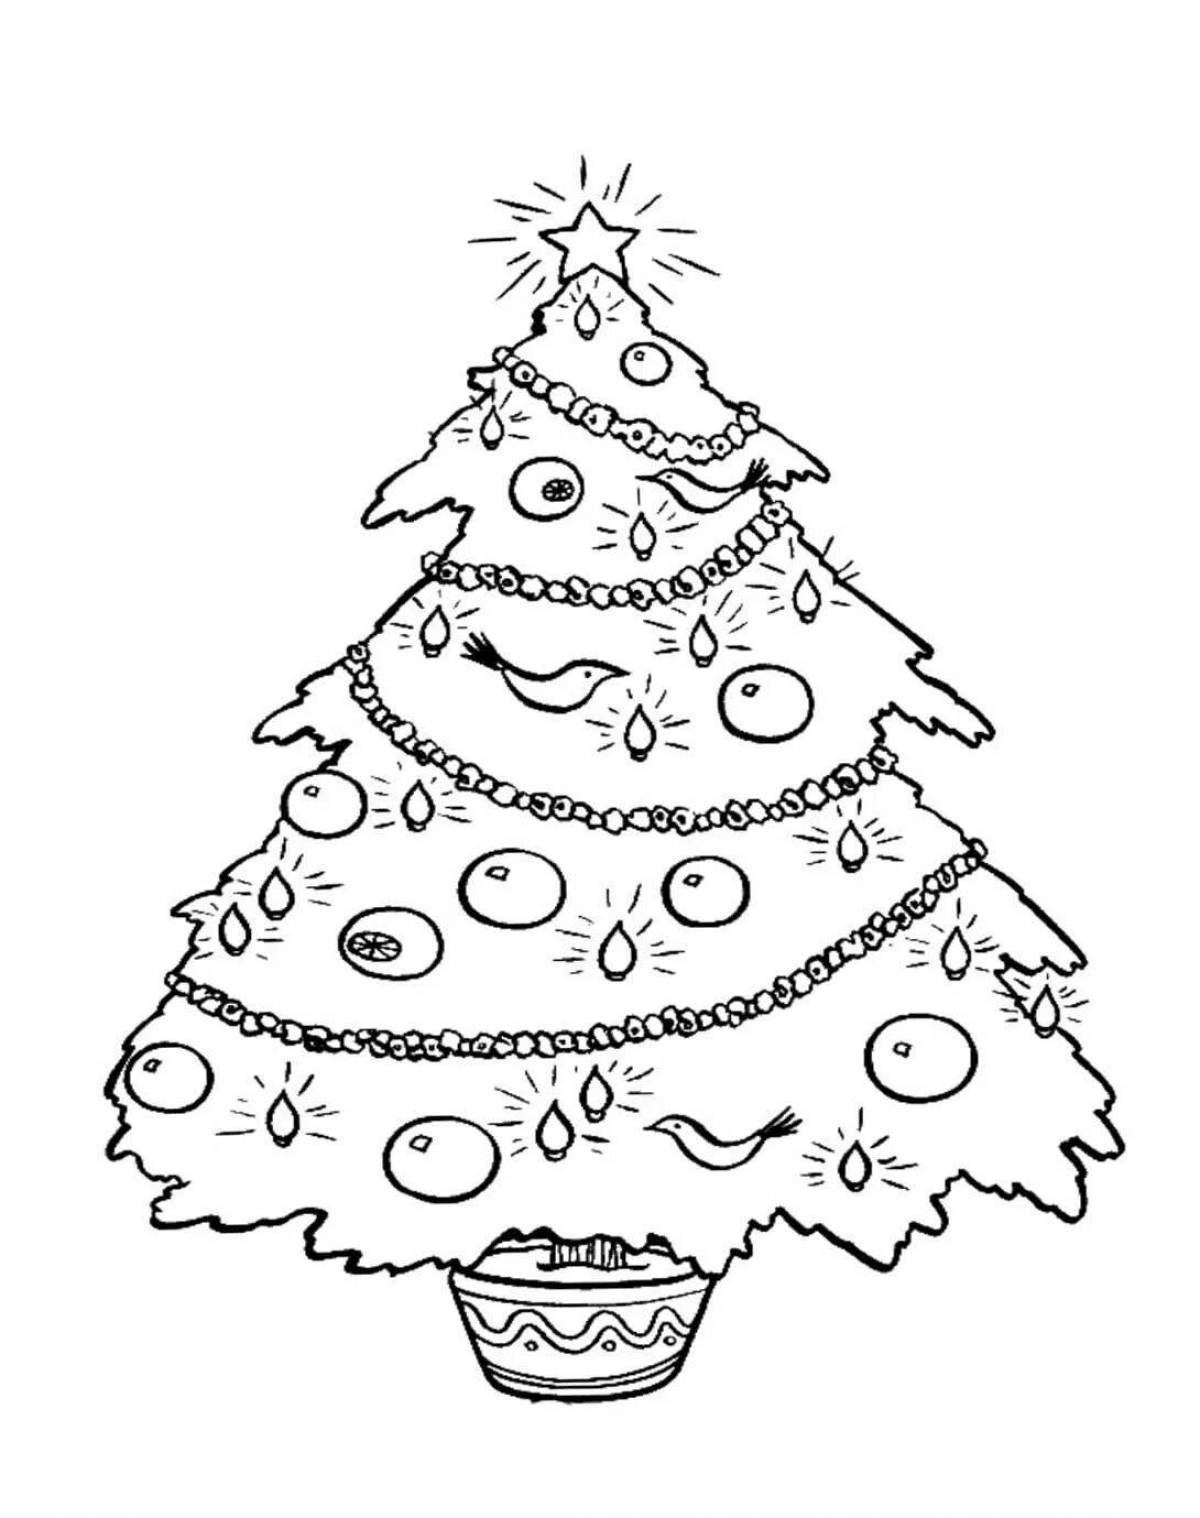 Bright Christmas tree coloring book